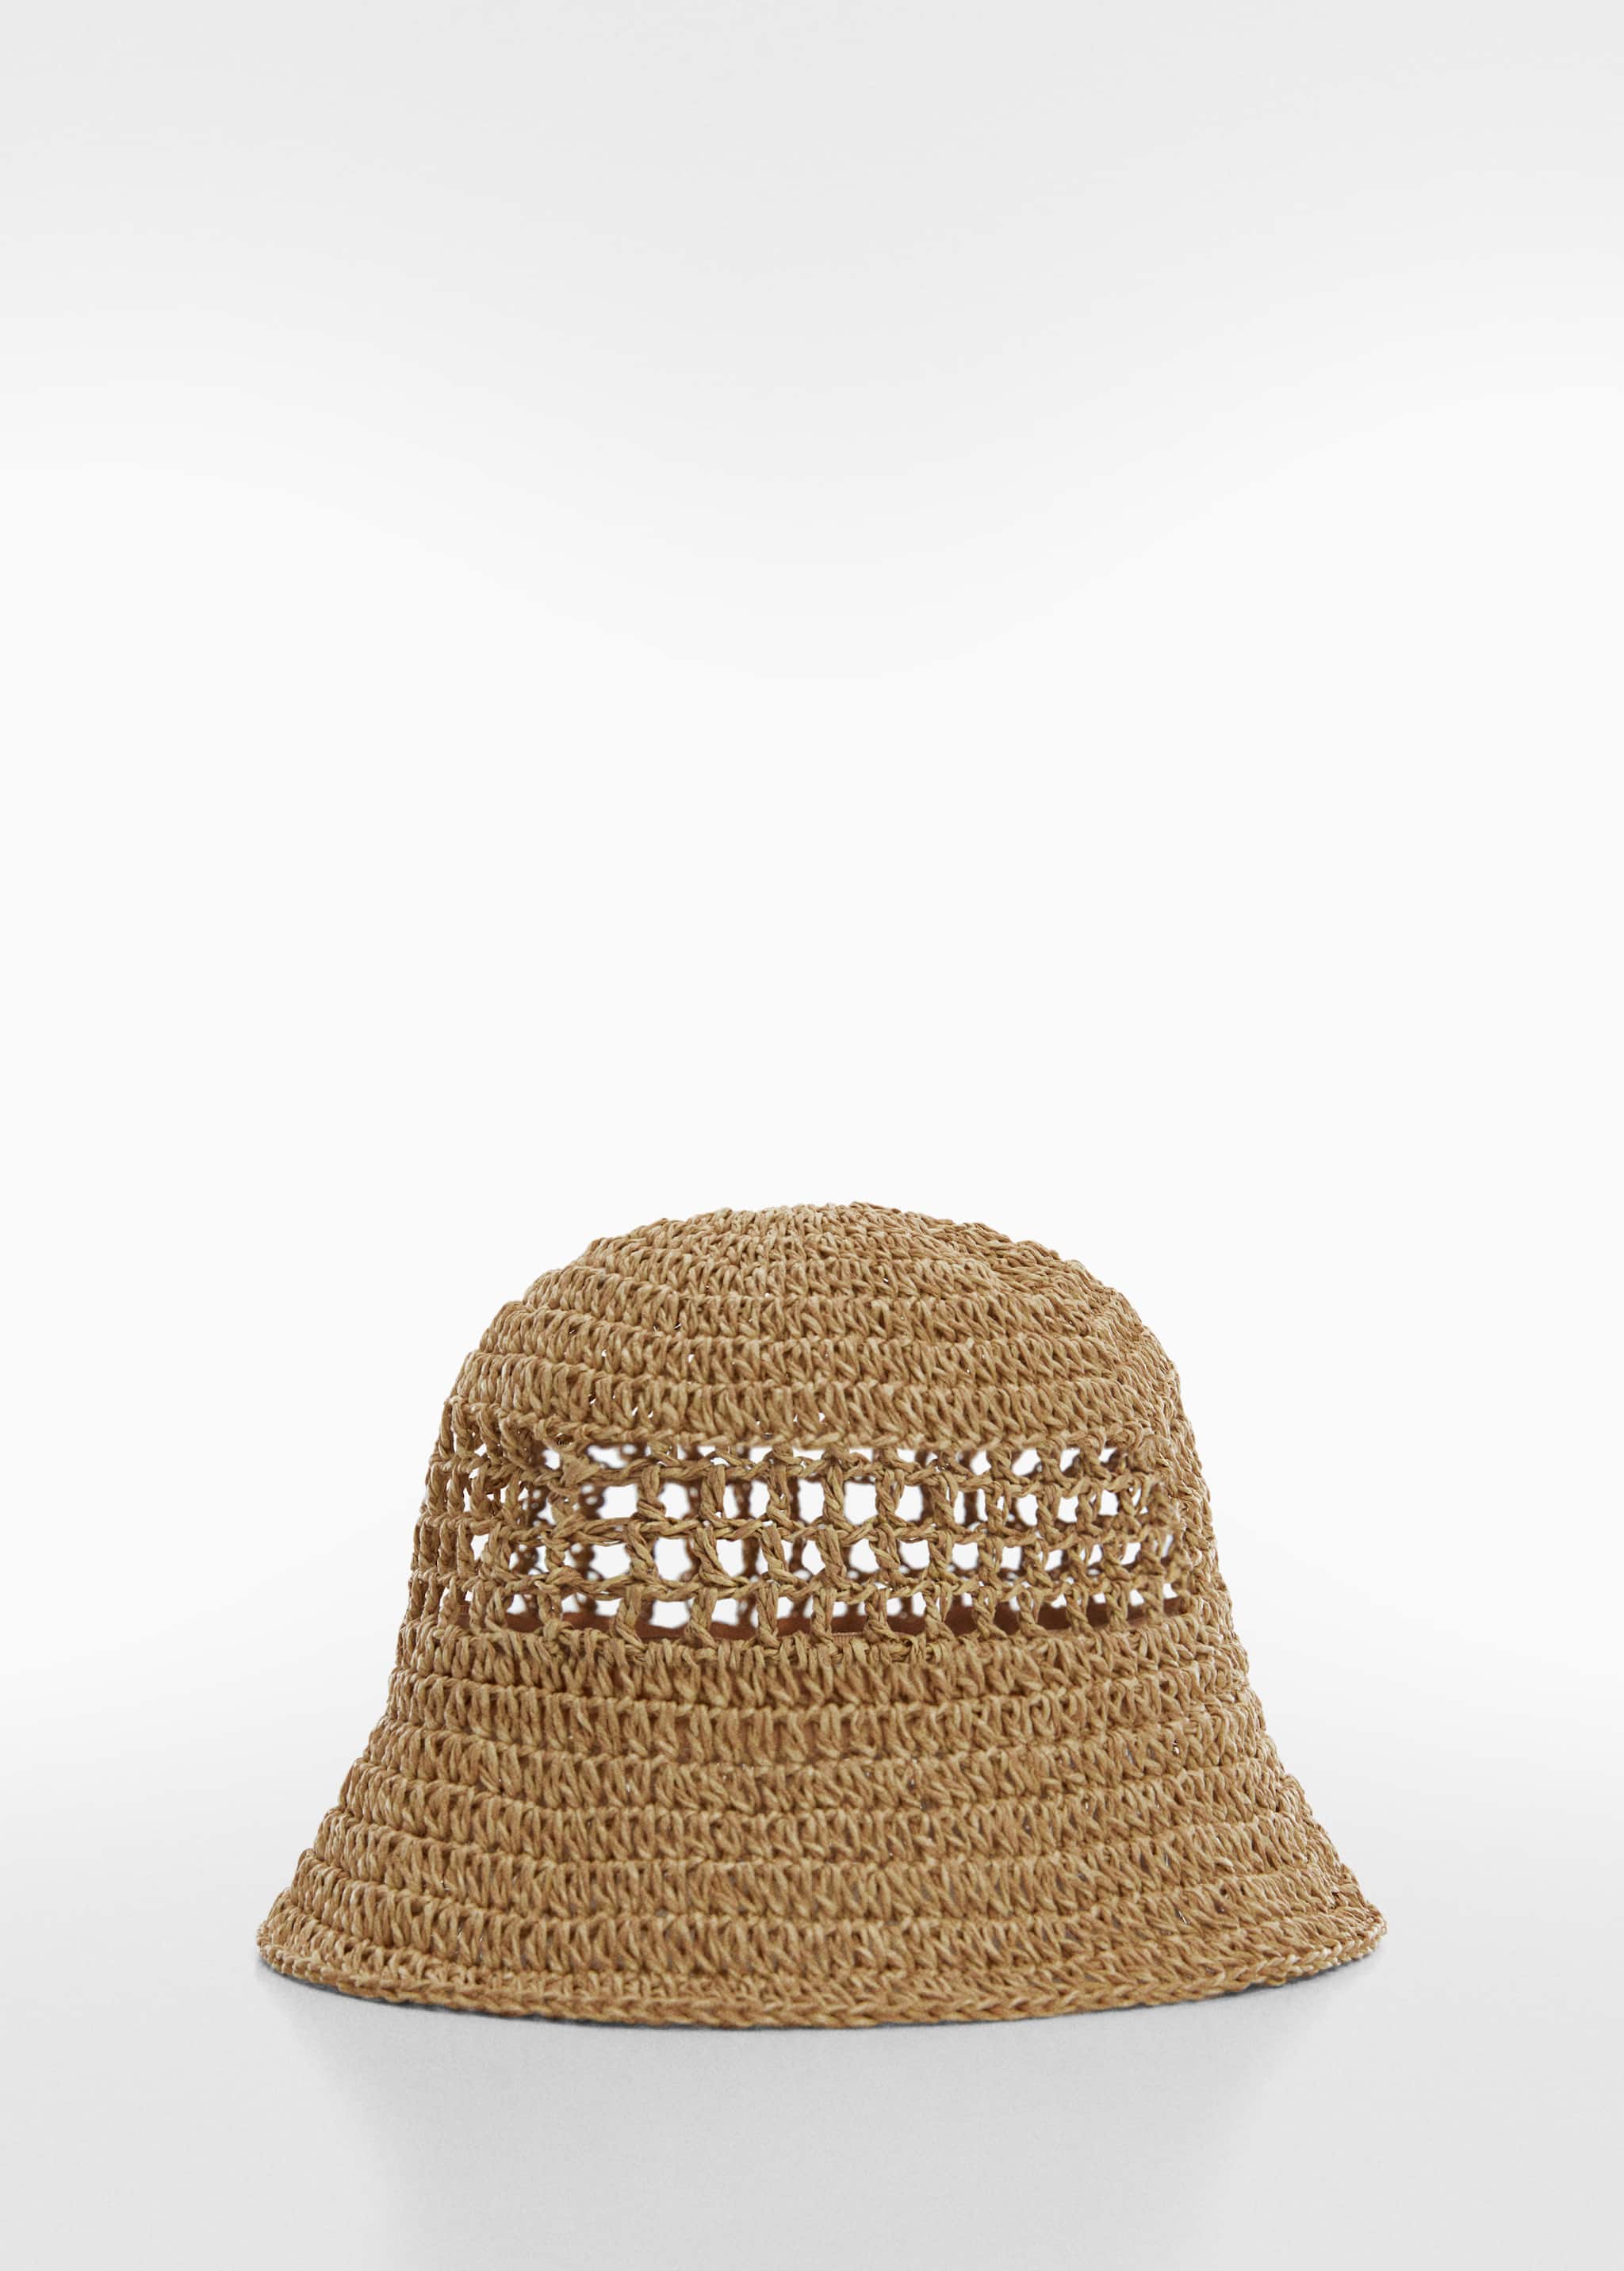 Straw bucket hat - Article without model